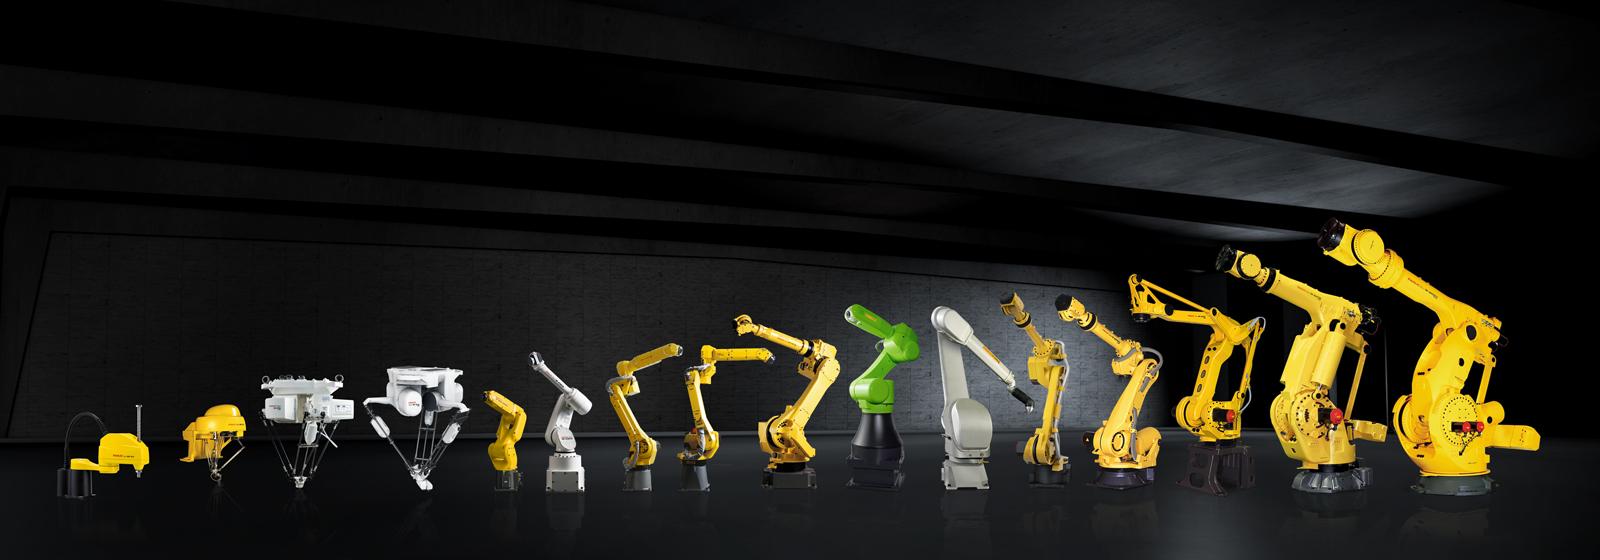 Product FANUC Robots | Solid Industrial and collaborative robots | Active8 Robots image